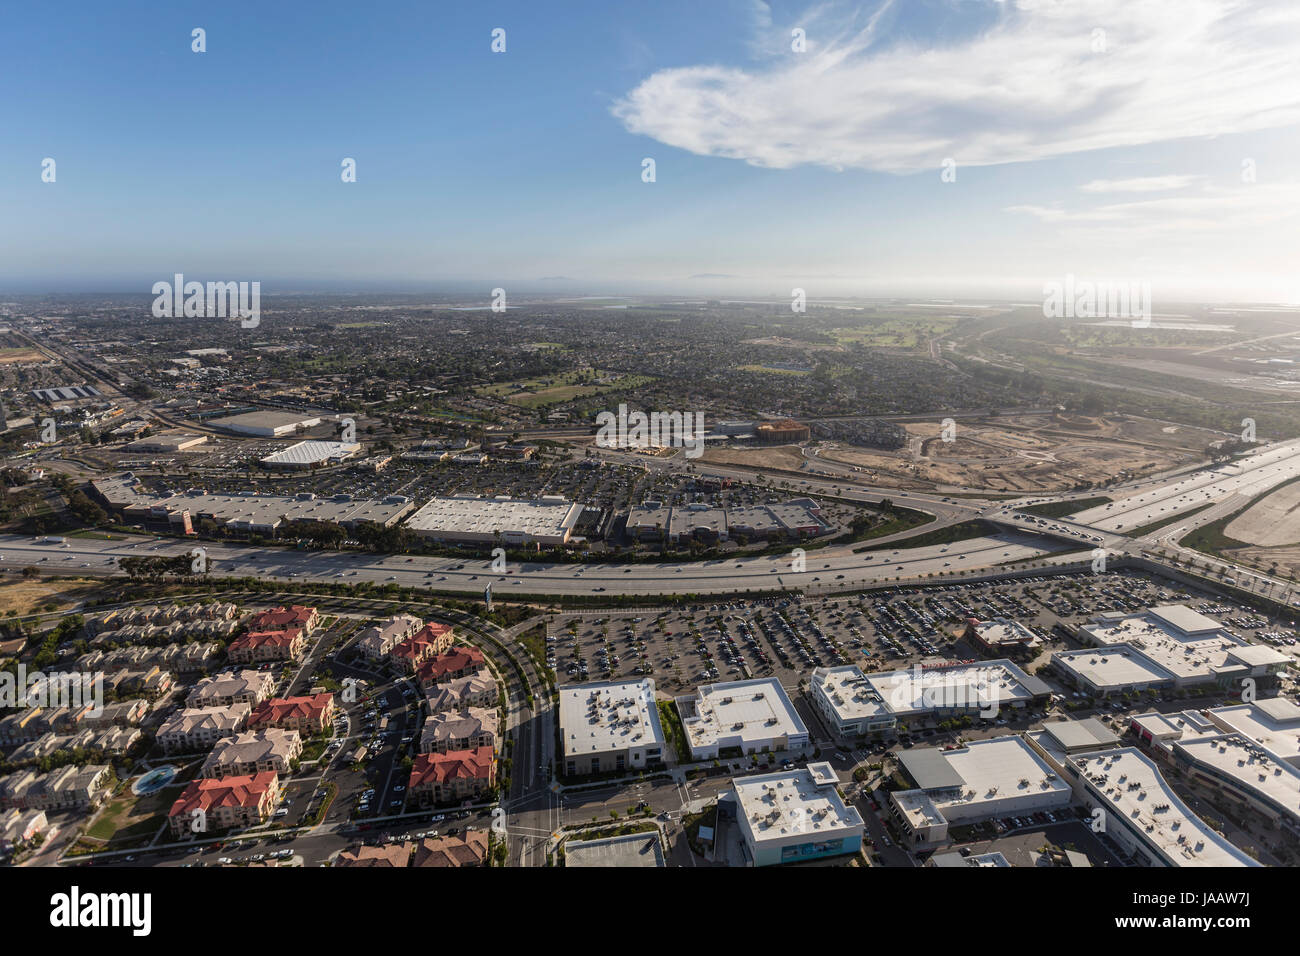 Oxnard, California, USA - May 27, 2017:  Aerial view of homes, buildings and shopping centers along the Ventura 101 Freeway. Stock Photo